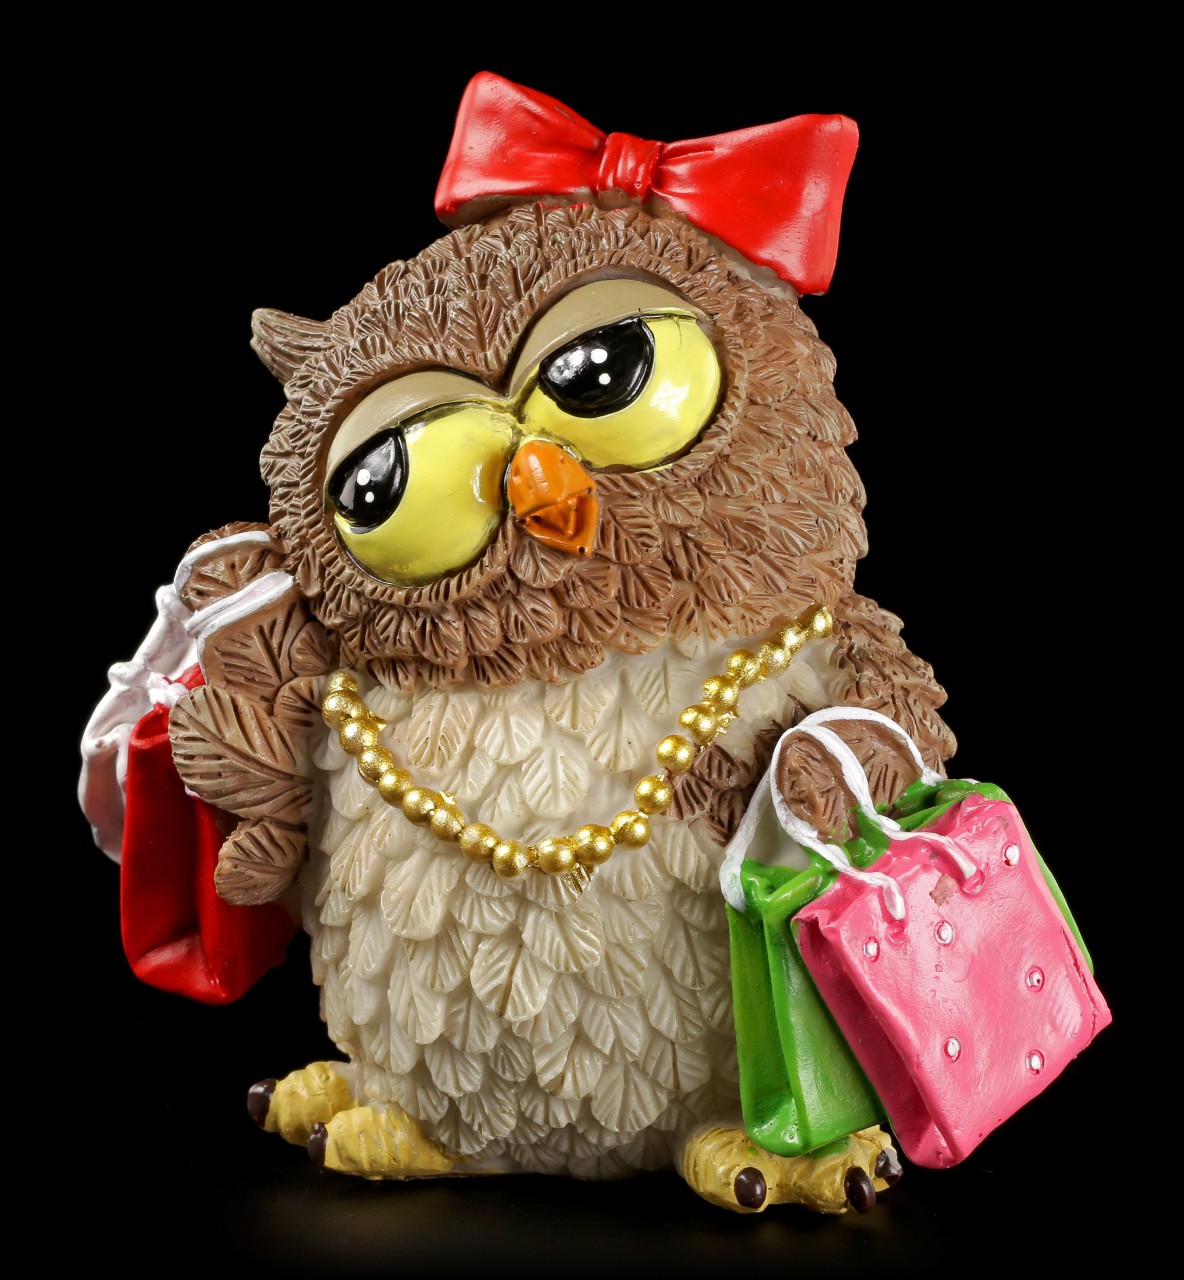 Funny Owl Figurine - Shopping Queen